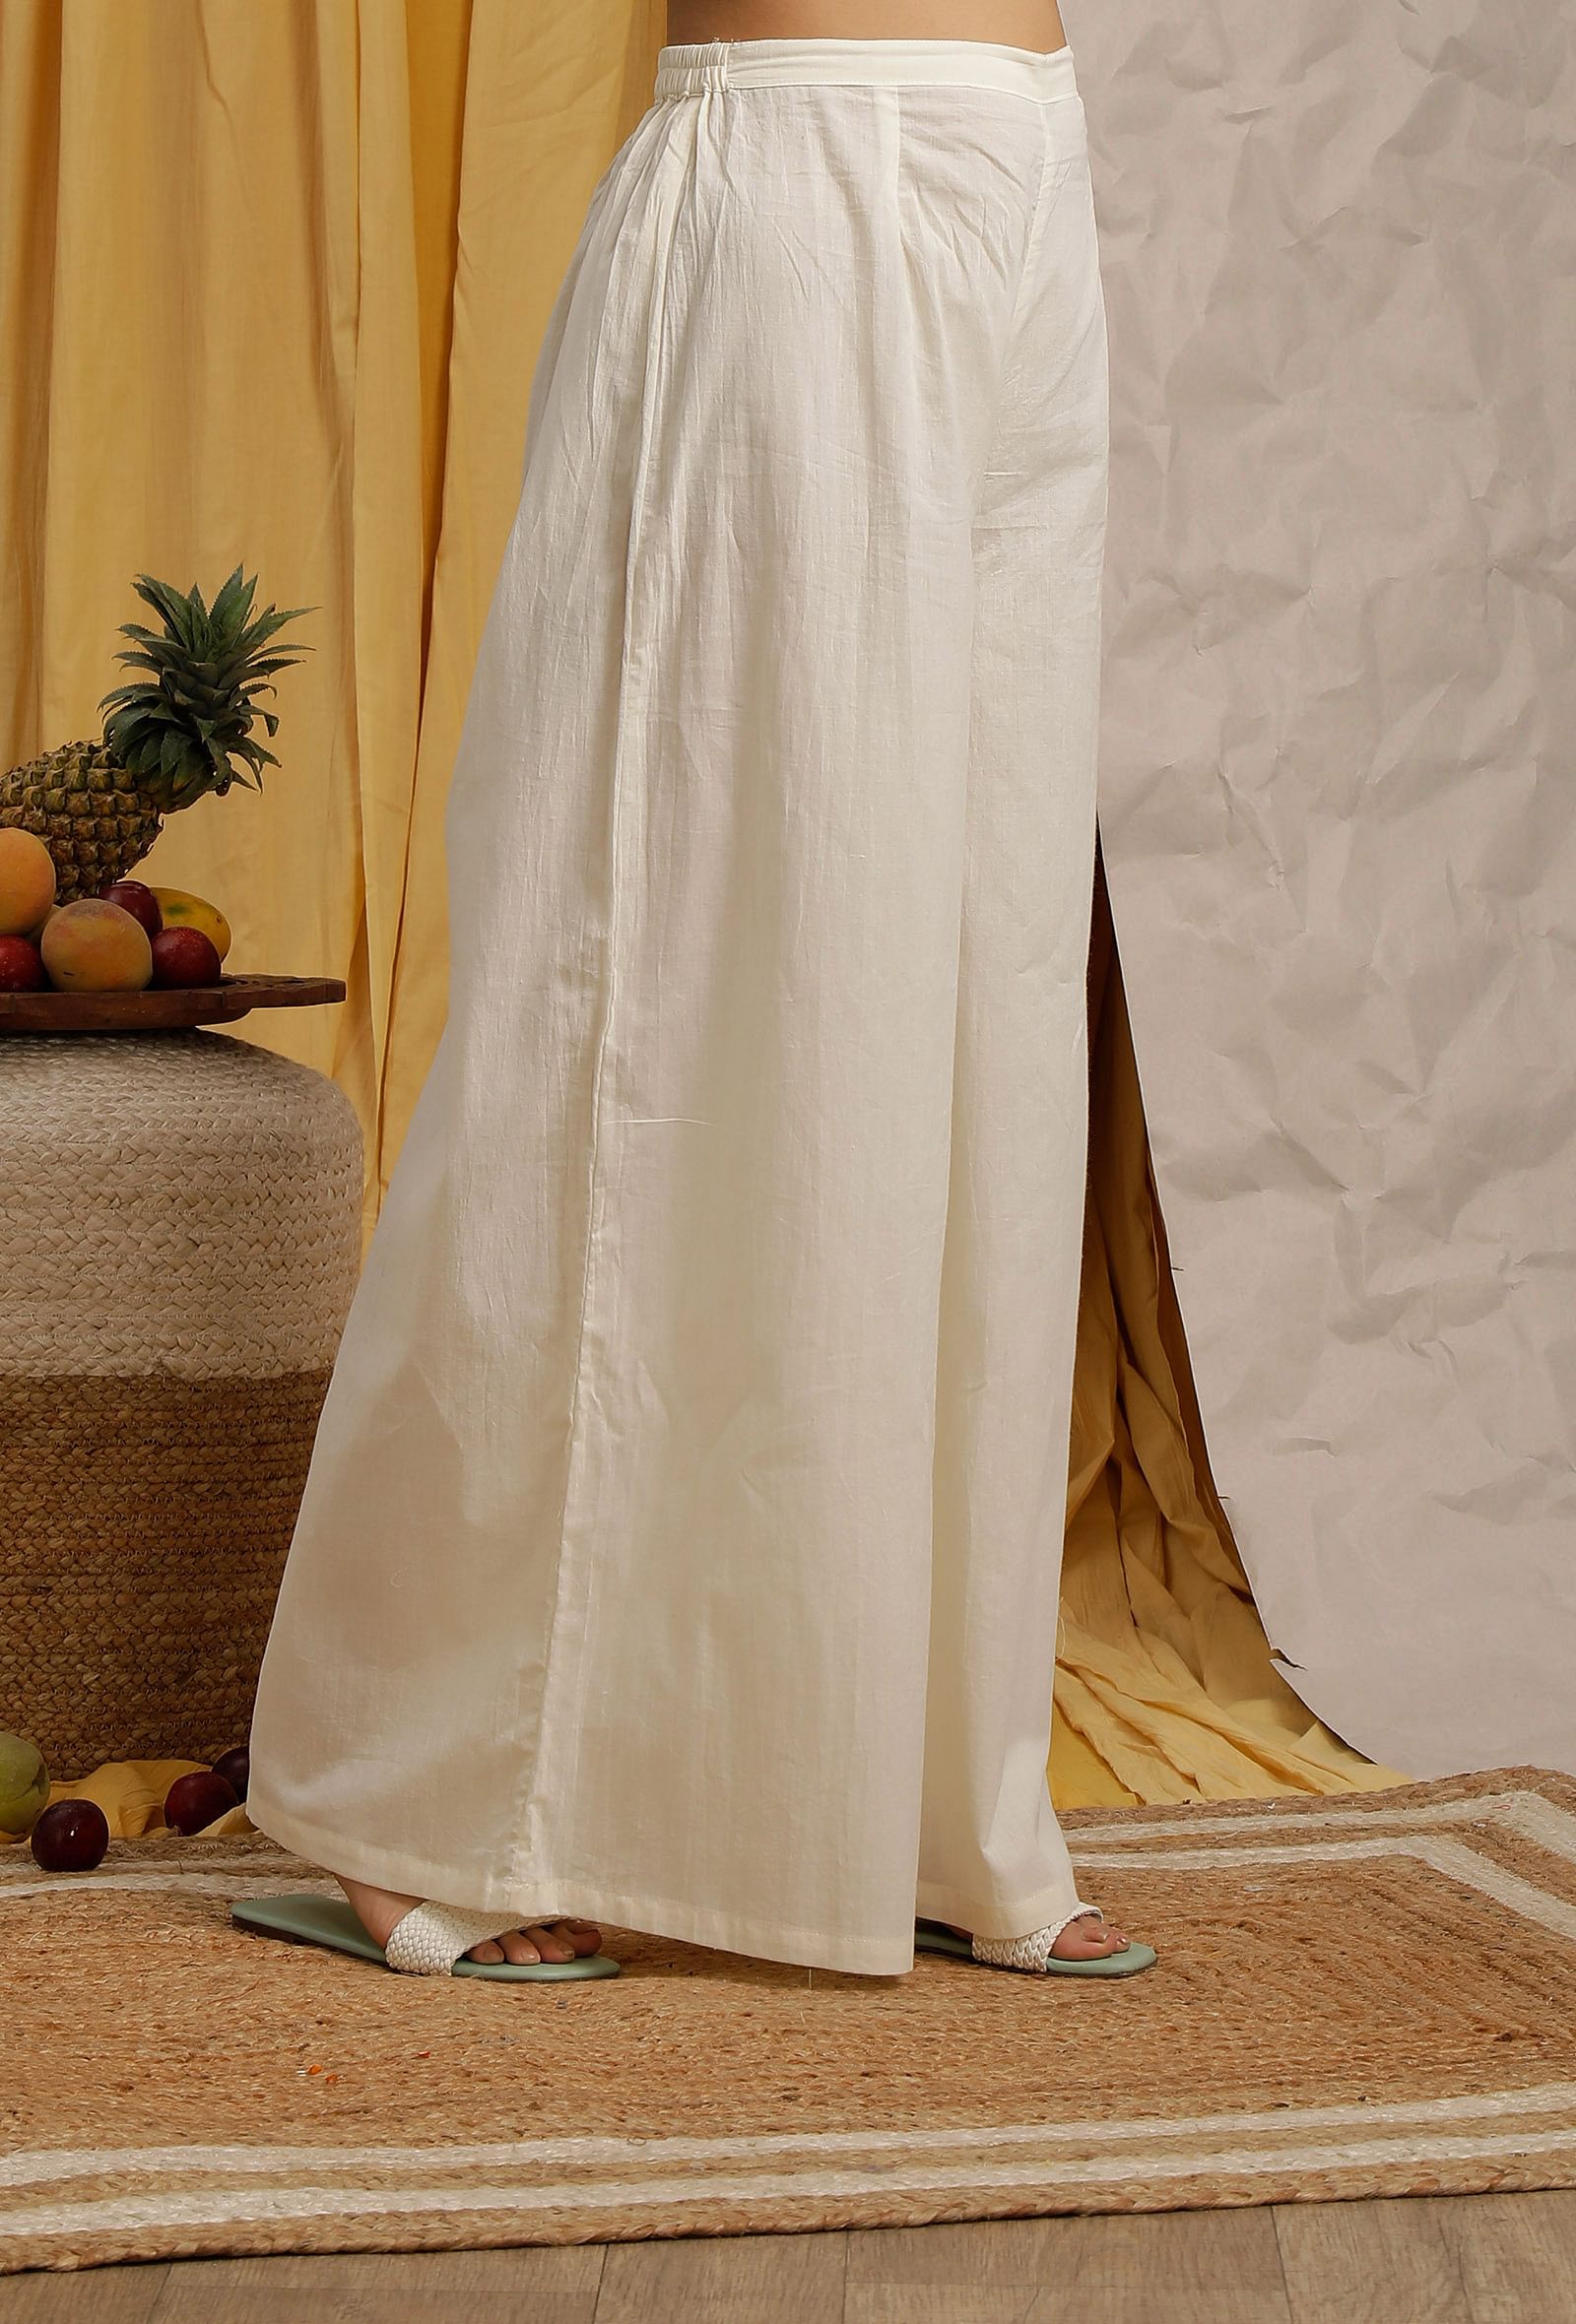 Vastraa Fusion Womens Regular Fit Cotton Chikan Palazzo  OffWhite  Manufacturer Supplier from Delhi India